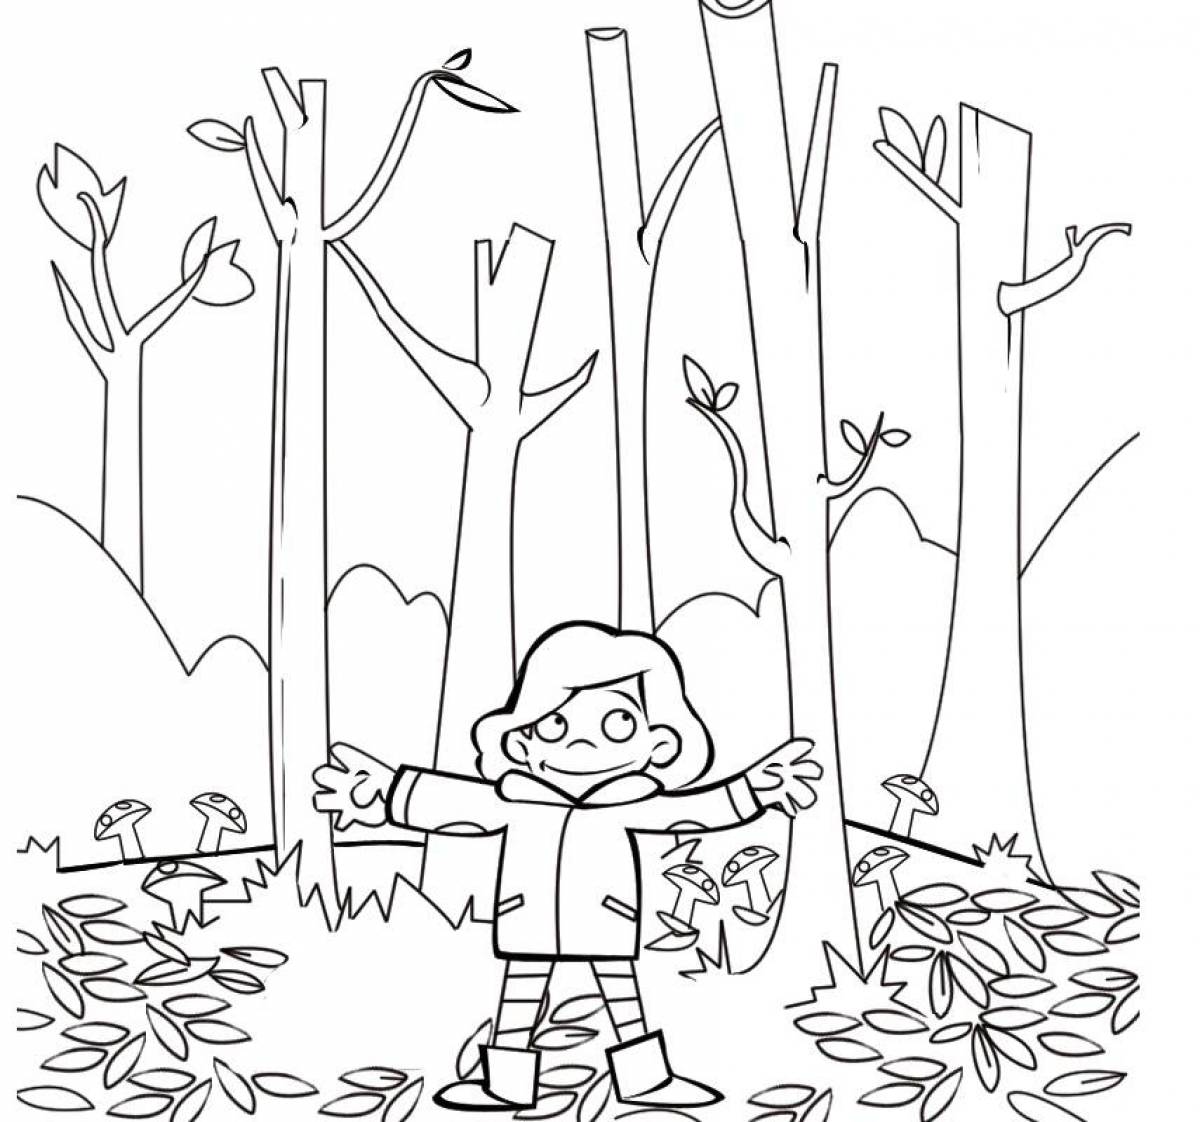 Fancy forest coloring book for kids